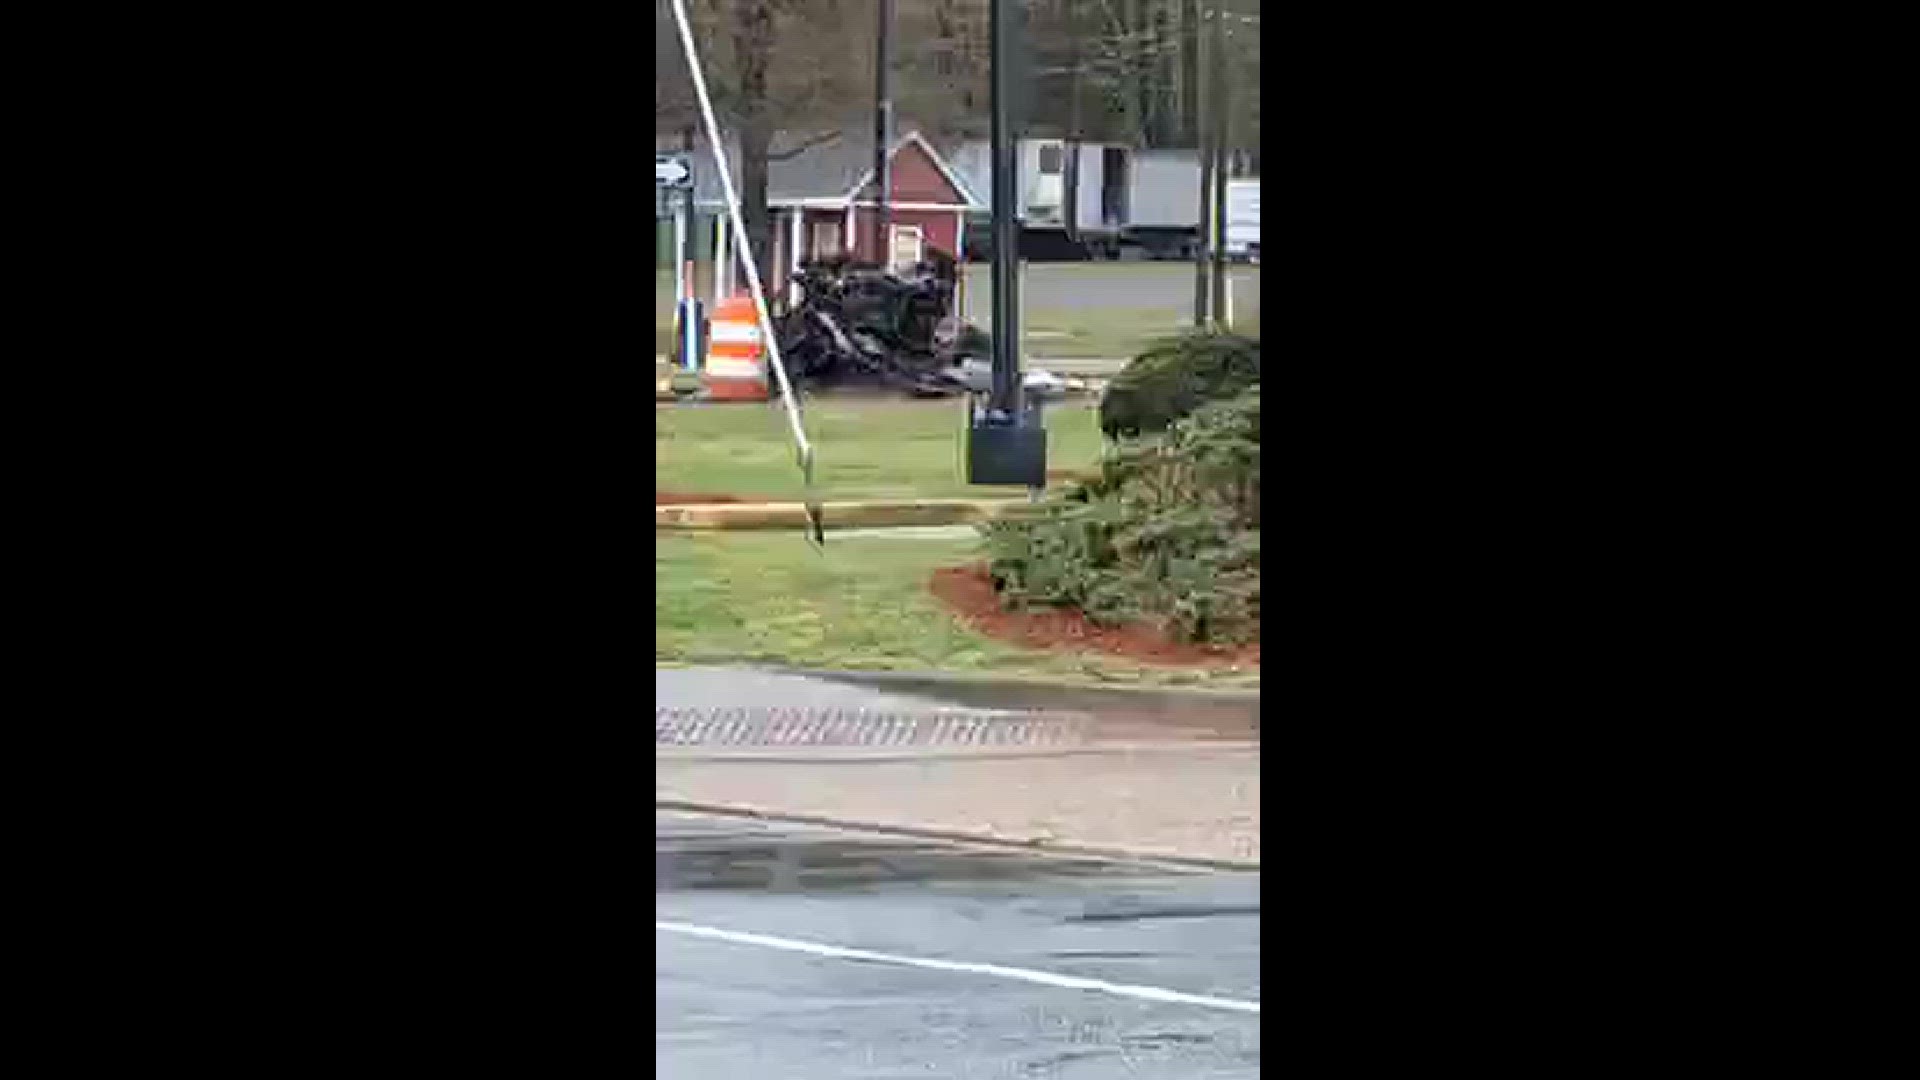 According to police, the crash happened early Saturday morning at the intersection of Warwick Blvd and Nettles Dr. Video courtesy Tim Turner
Credit: Tim Turner